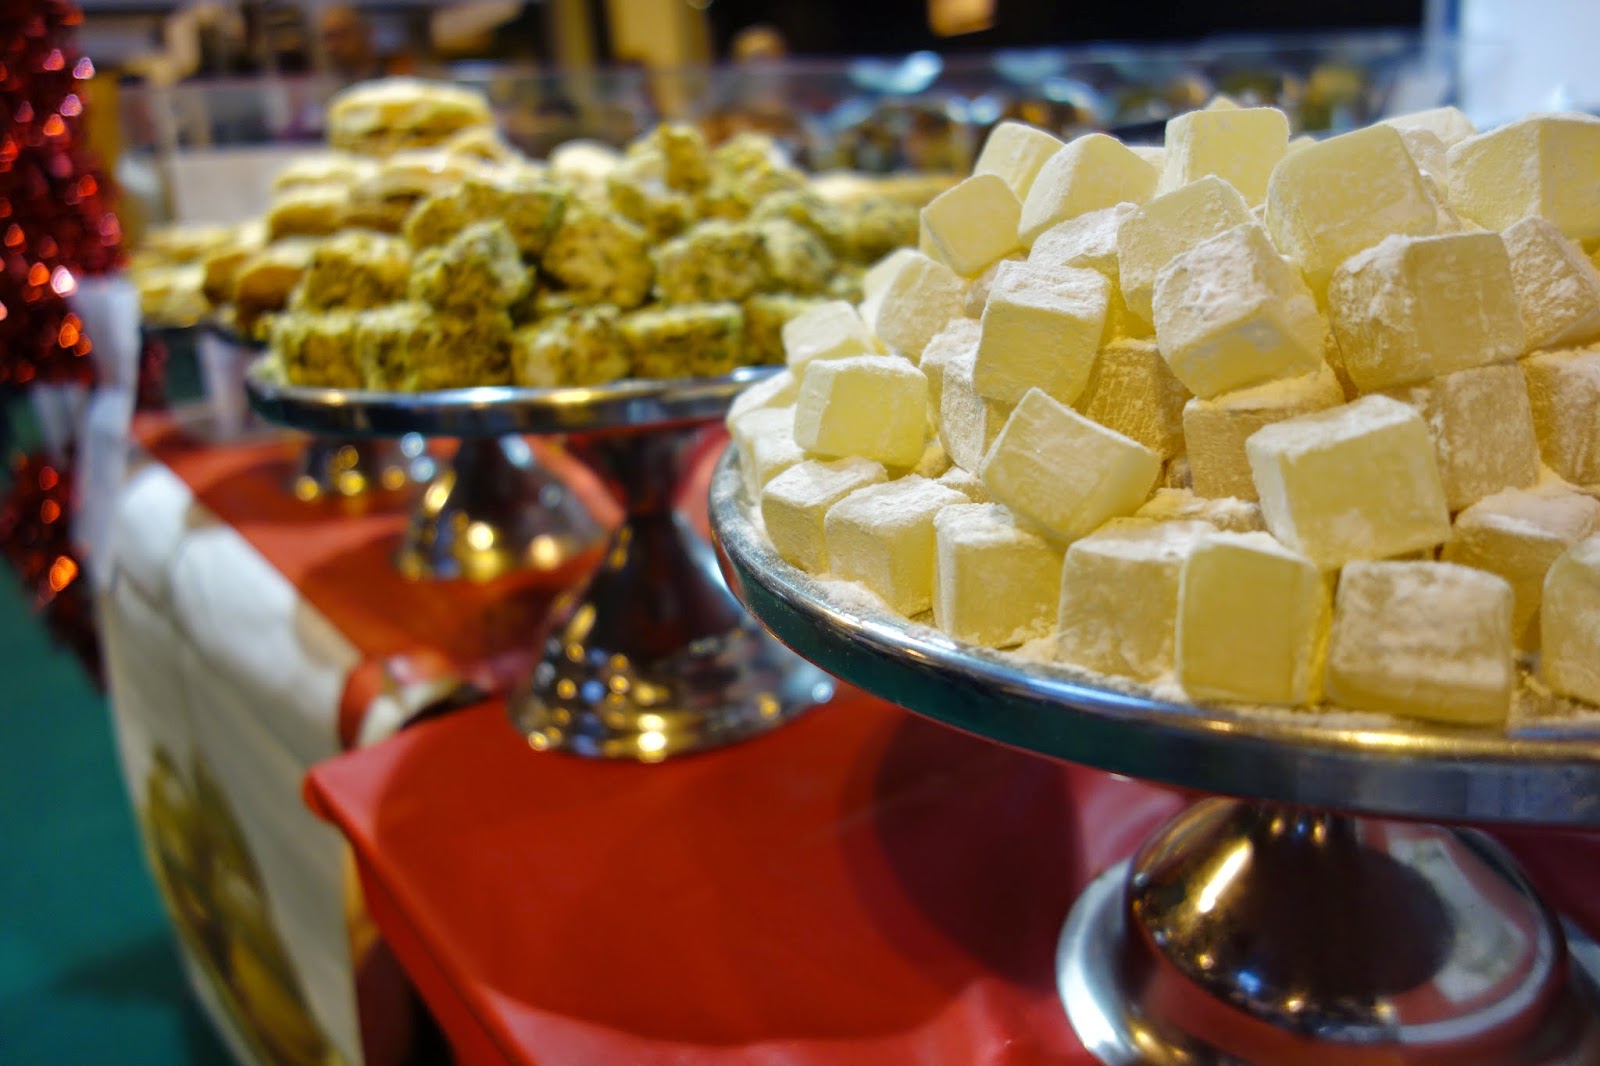 Rows of turkish delight displayed at the Good Food Show Winter 